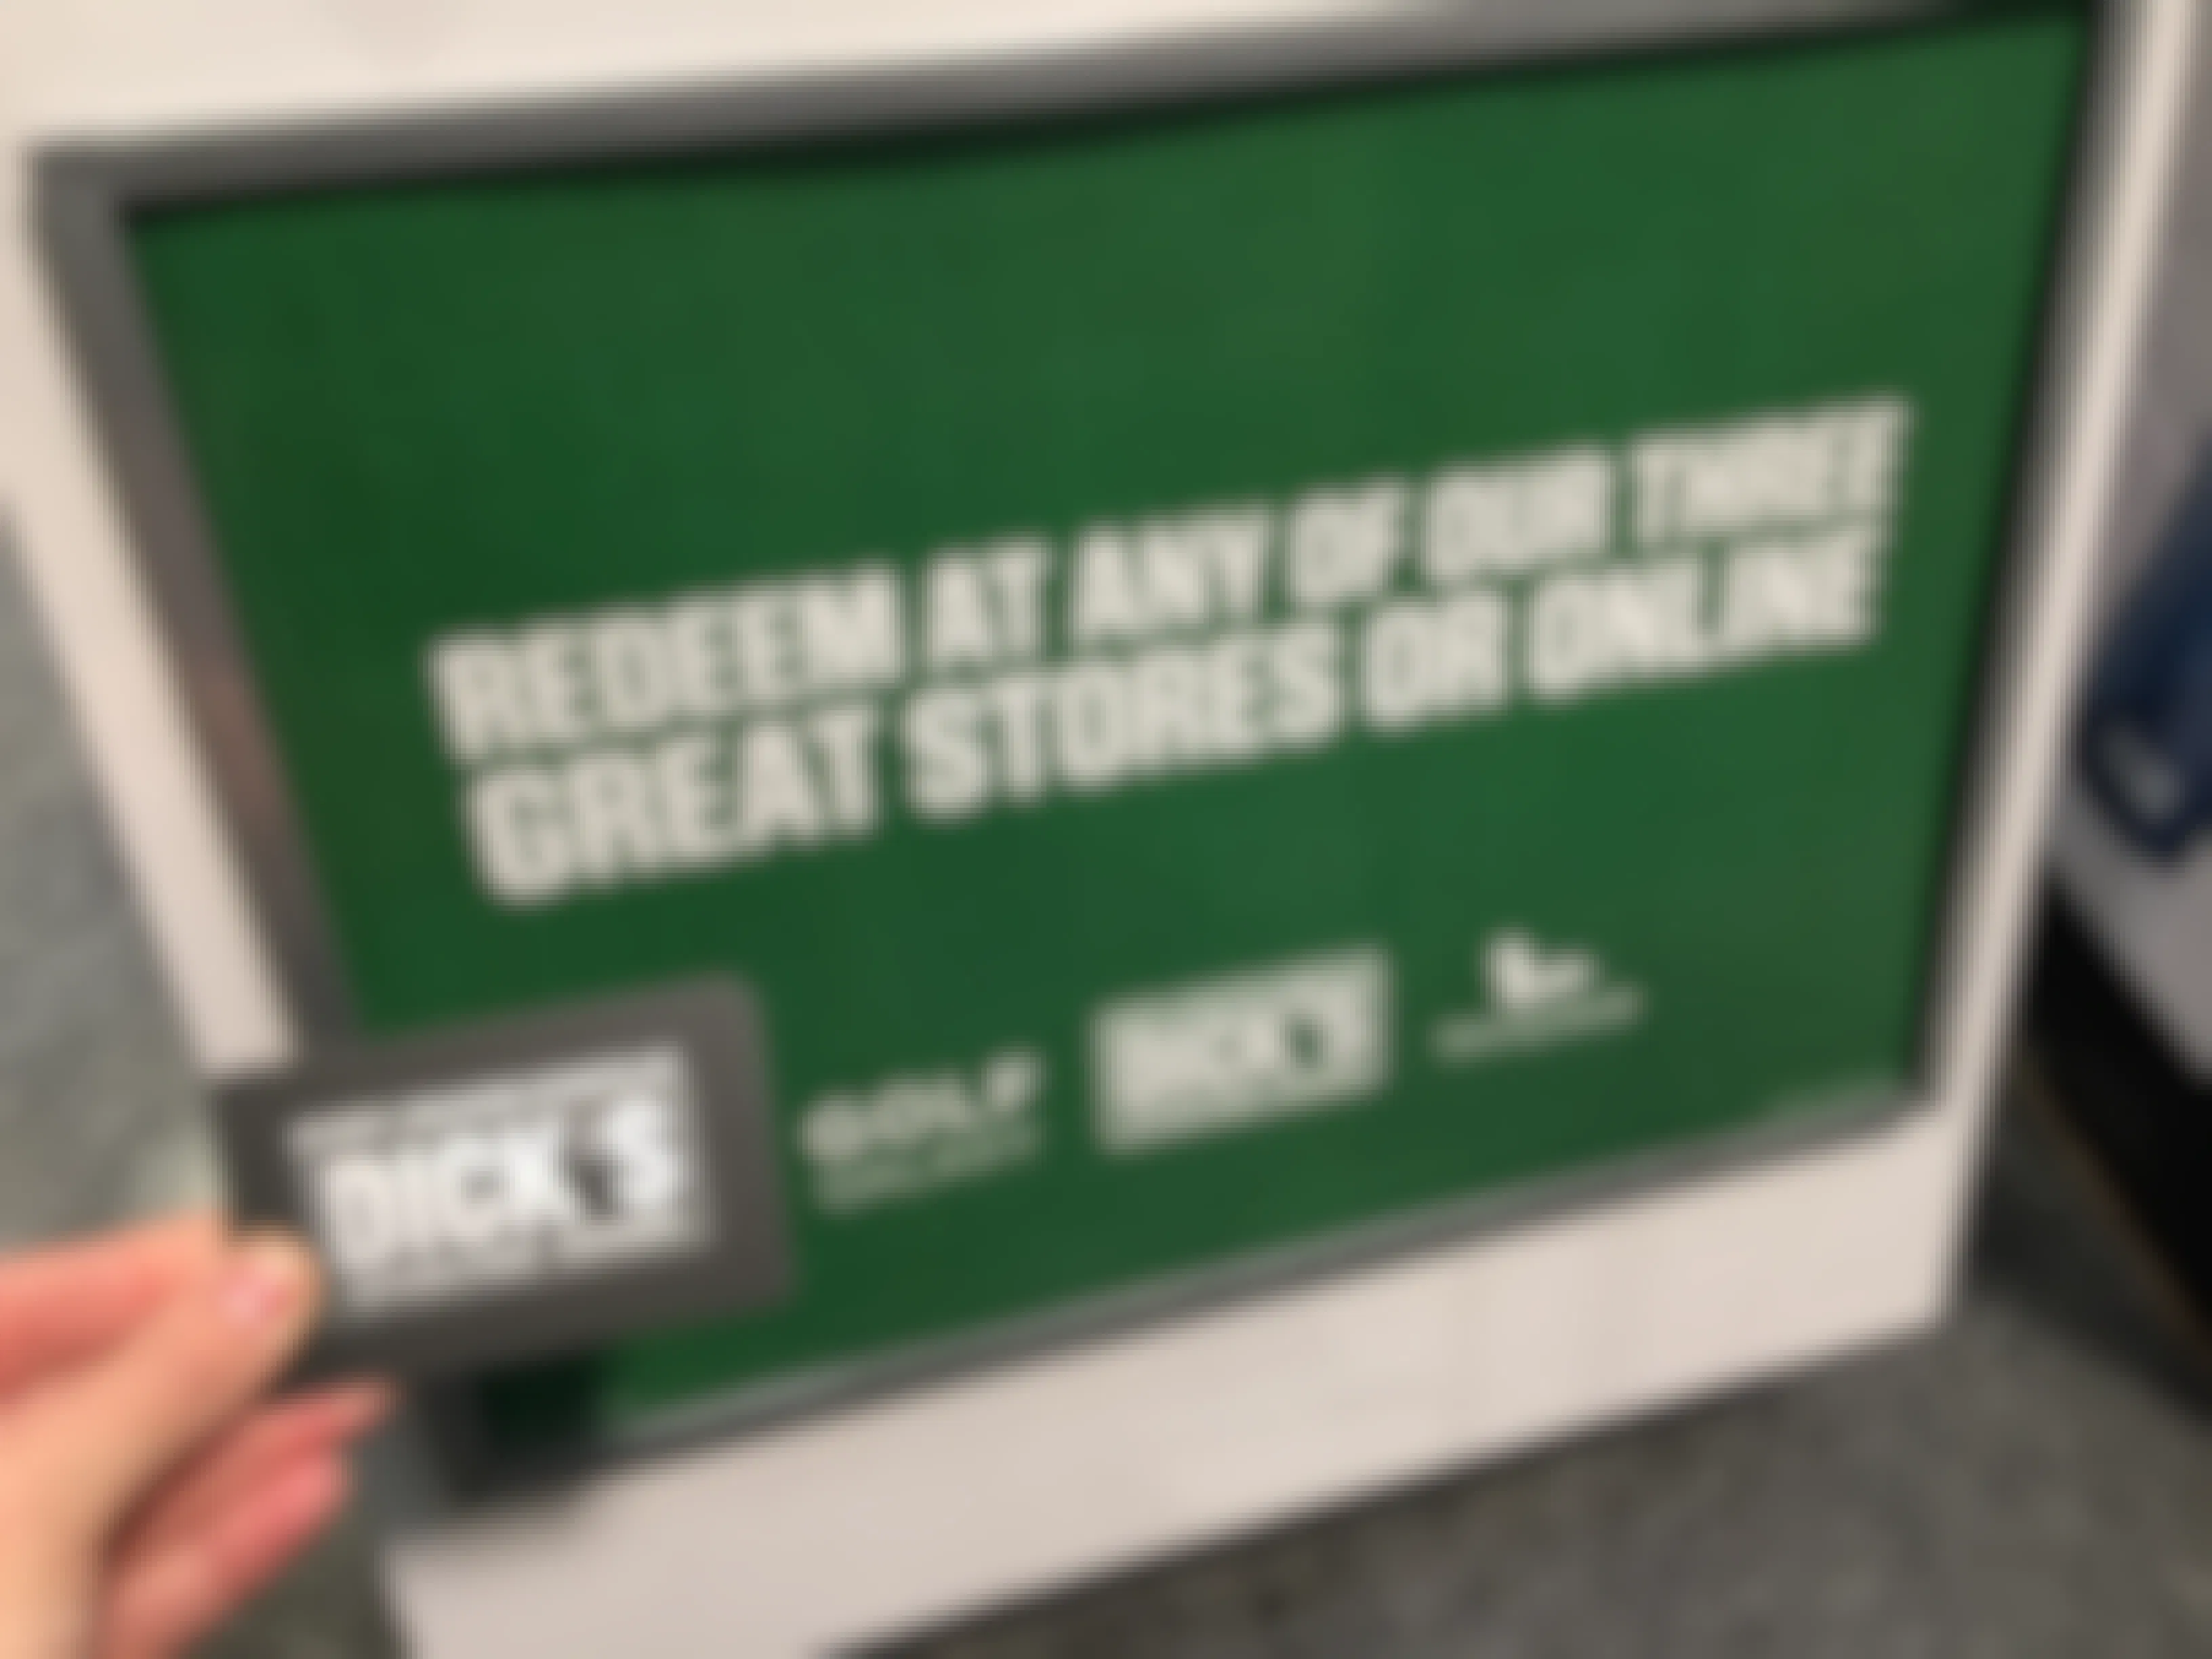 A person's hand holding a Dick's Sporting Goods gift card in front of a sign that reads "Redeem at any of our three great stores or online" and lists the stores Golf Galaxy, Dick's Sporting Goods, and Field & Stream.